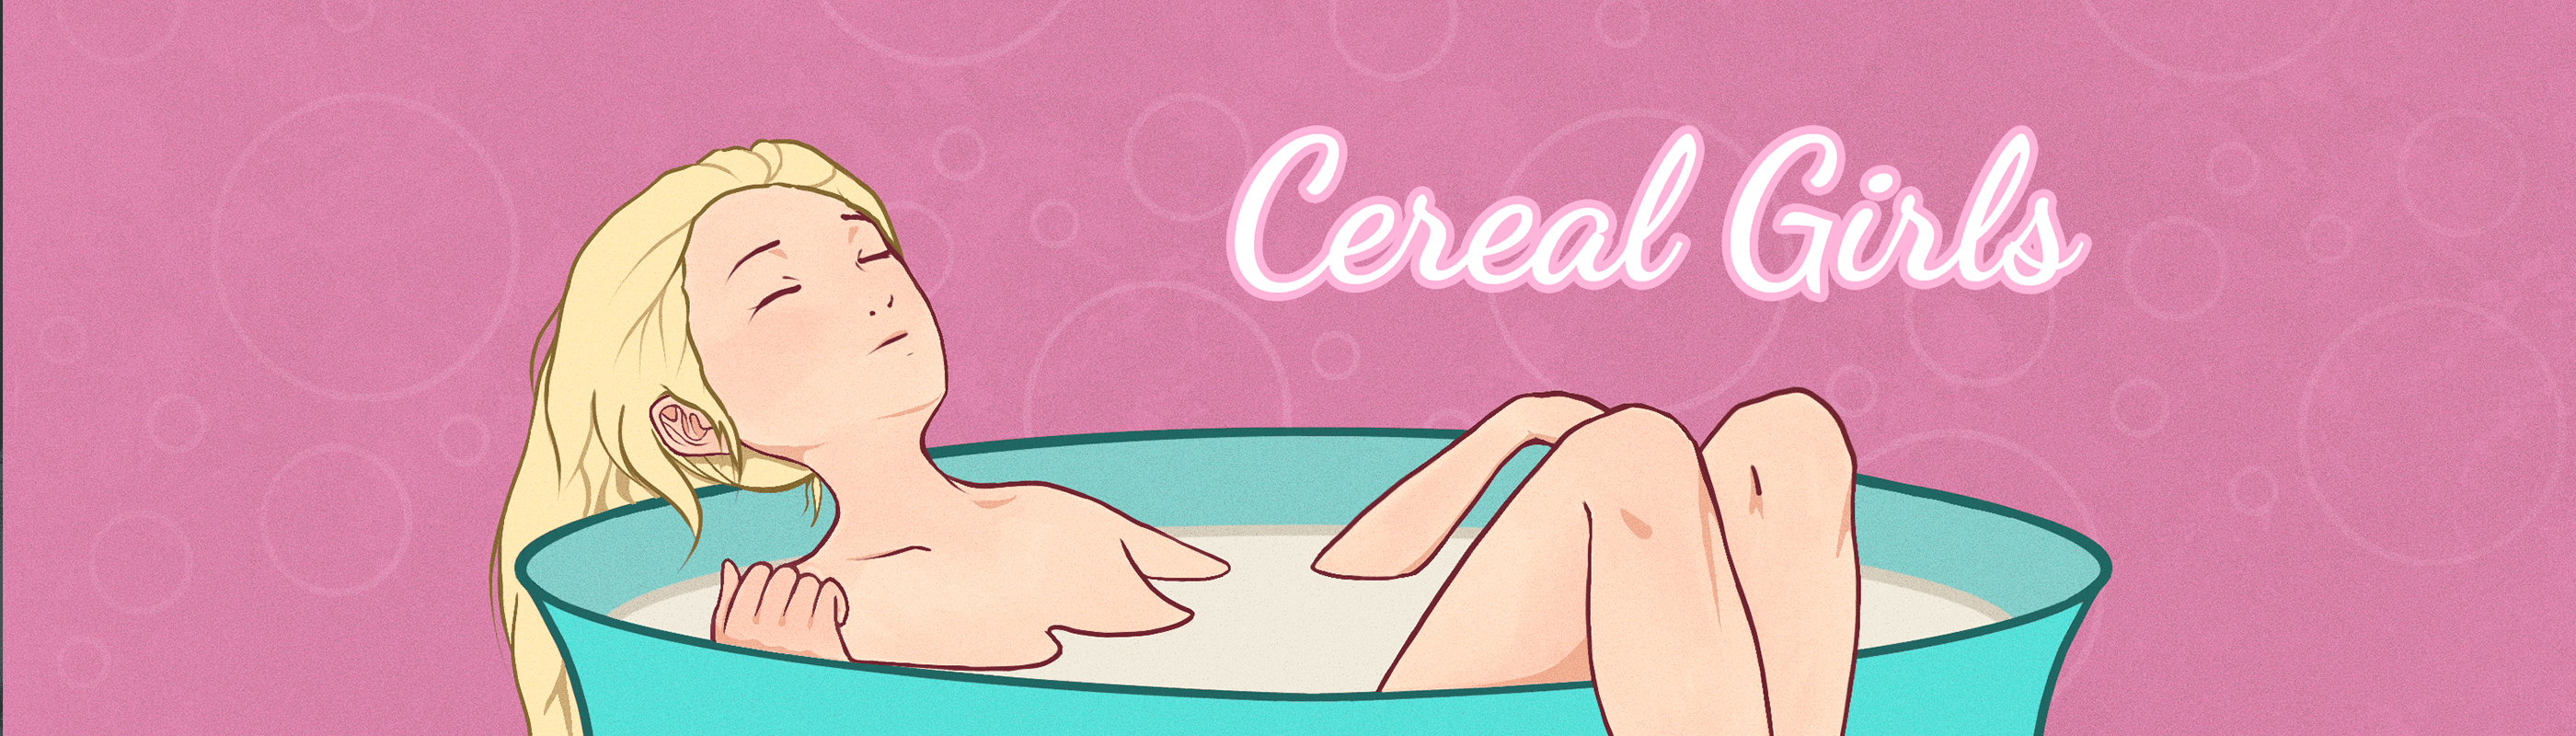 Cereal Girls